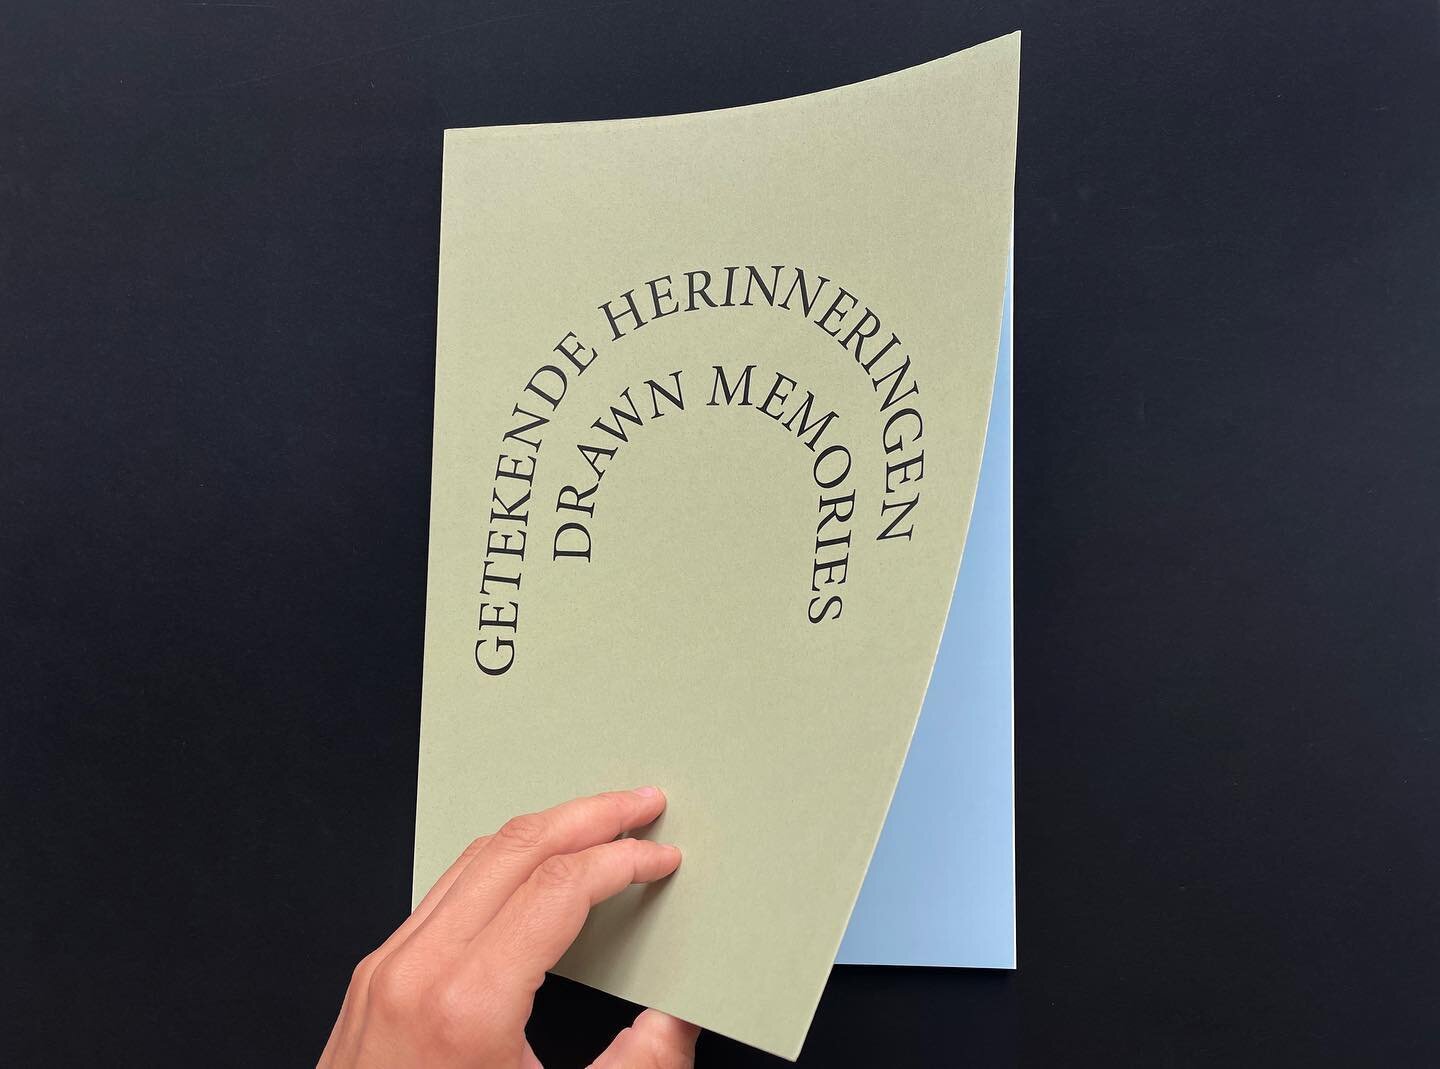 ✍️ &lsquo;Drawn memories&rsquo;, a publication we designed for Museum Boijmans Van Beuningen, with personal texts from curator Albert Elen about 19 highlights of his curatorial period at the museum.

Commissioned by @boijmans 
Printed by @npndrukkers